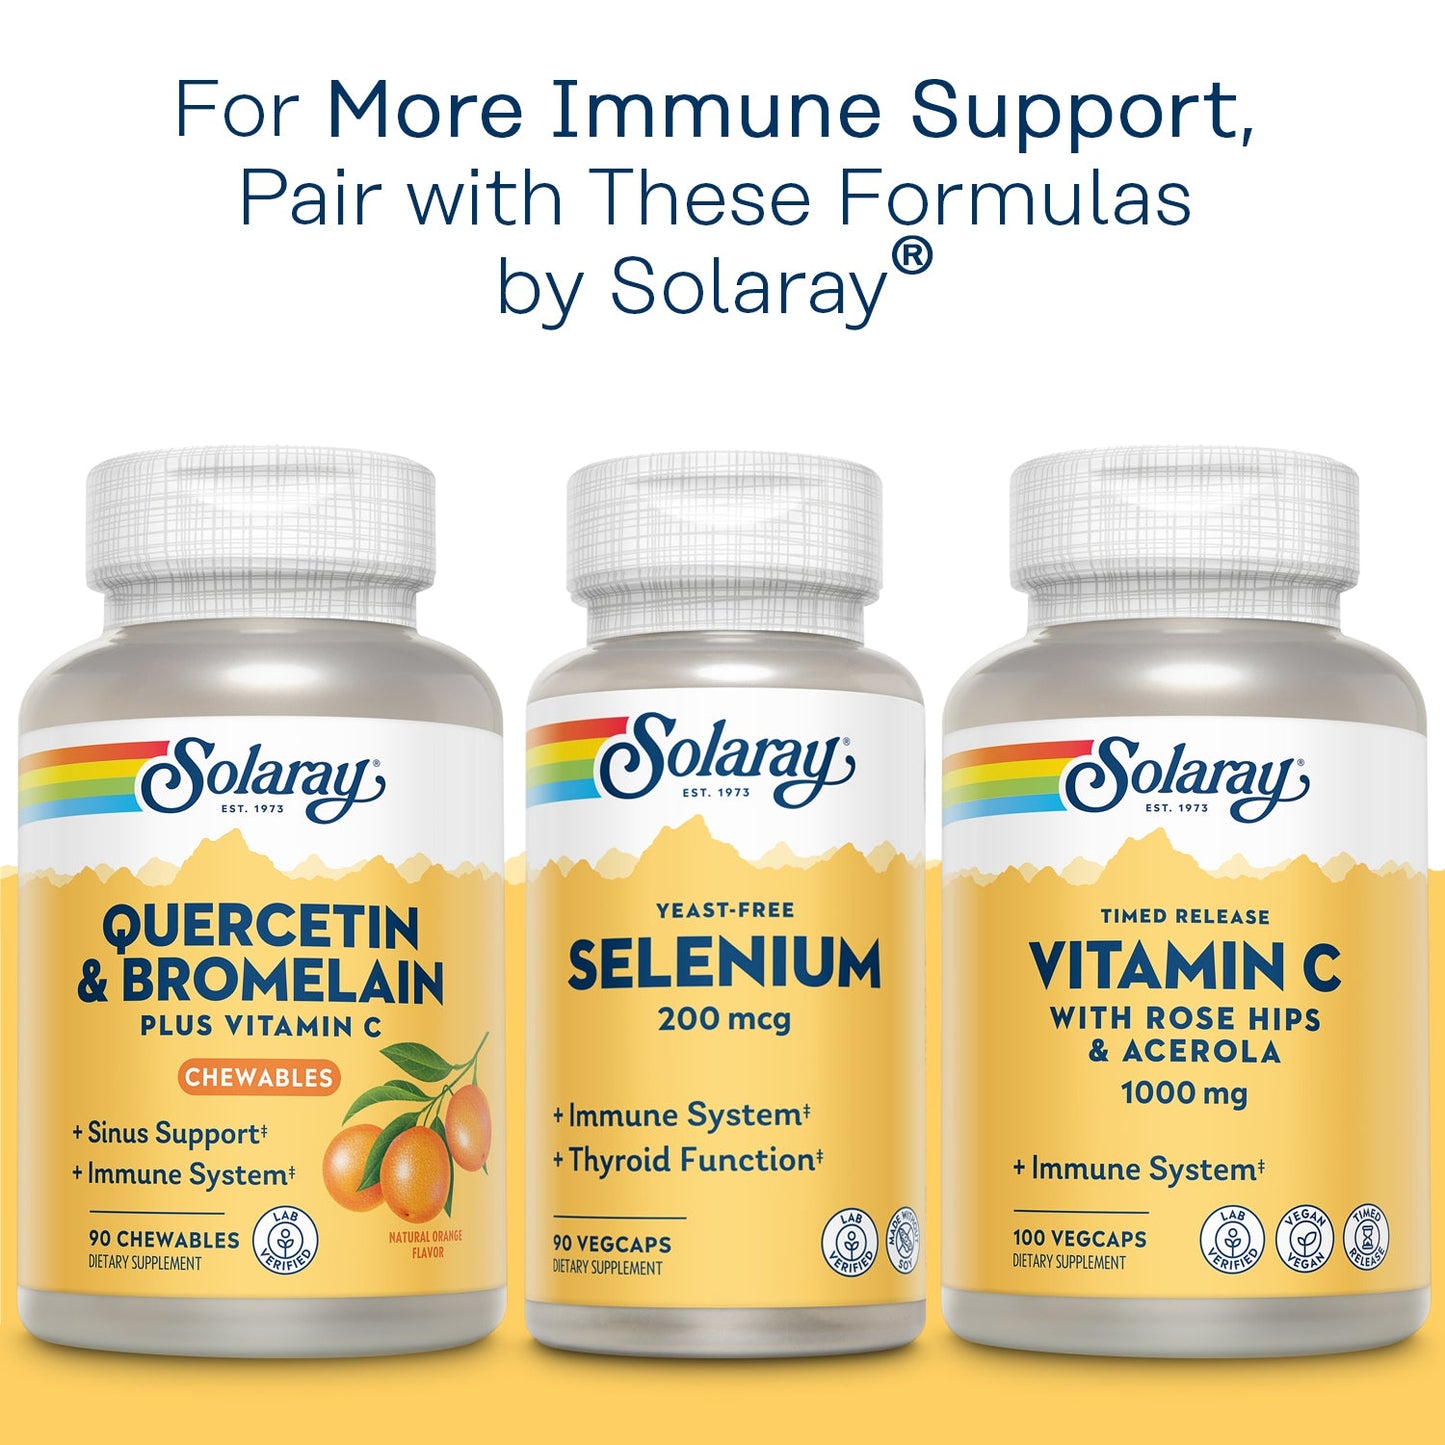 Solaray OptiZinc 30mg Immune Support Supplement, Chelated Zinc Capsules, Endocrine Systems and Cellular Health Support, with Methionine, Vitamin B6 and NO Copper, 60-Day Guarantee, 60 Serv, 60 VegCaps